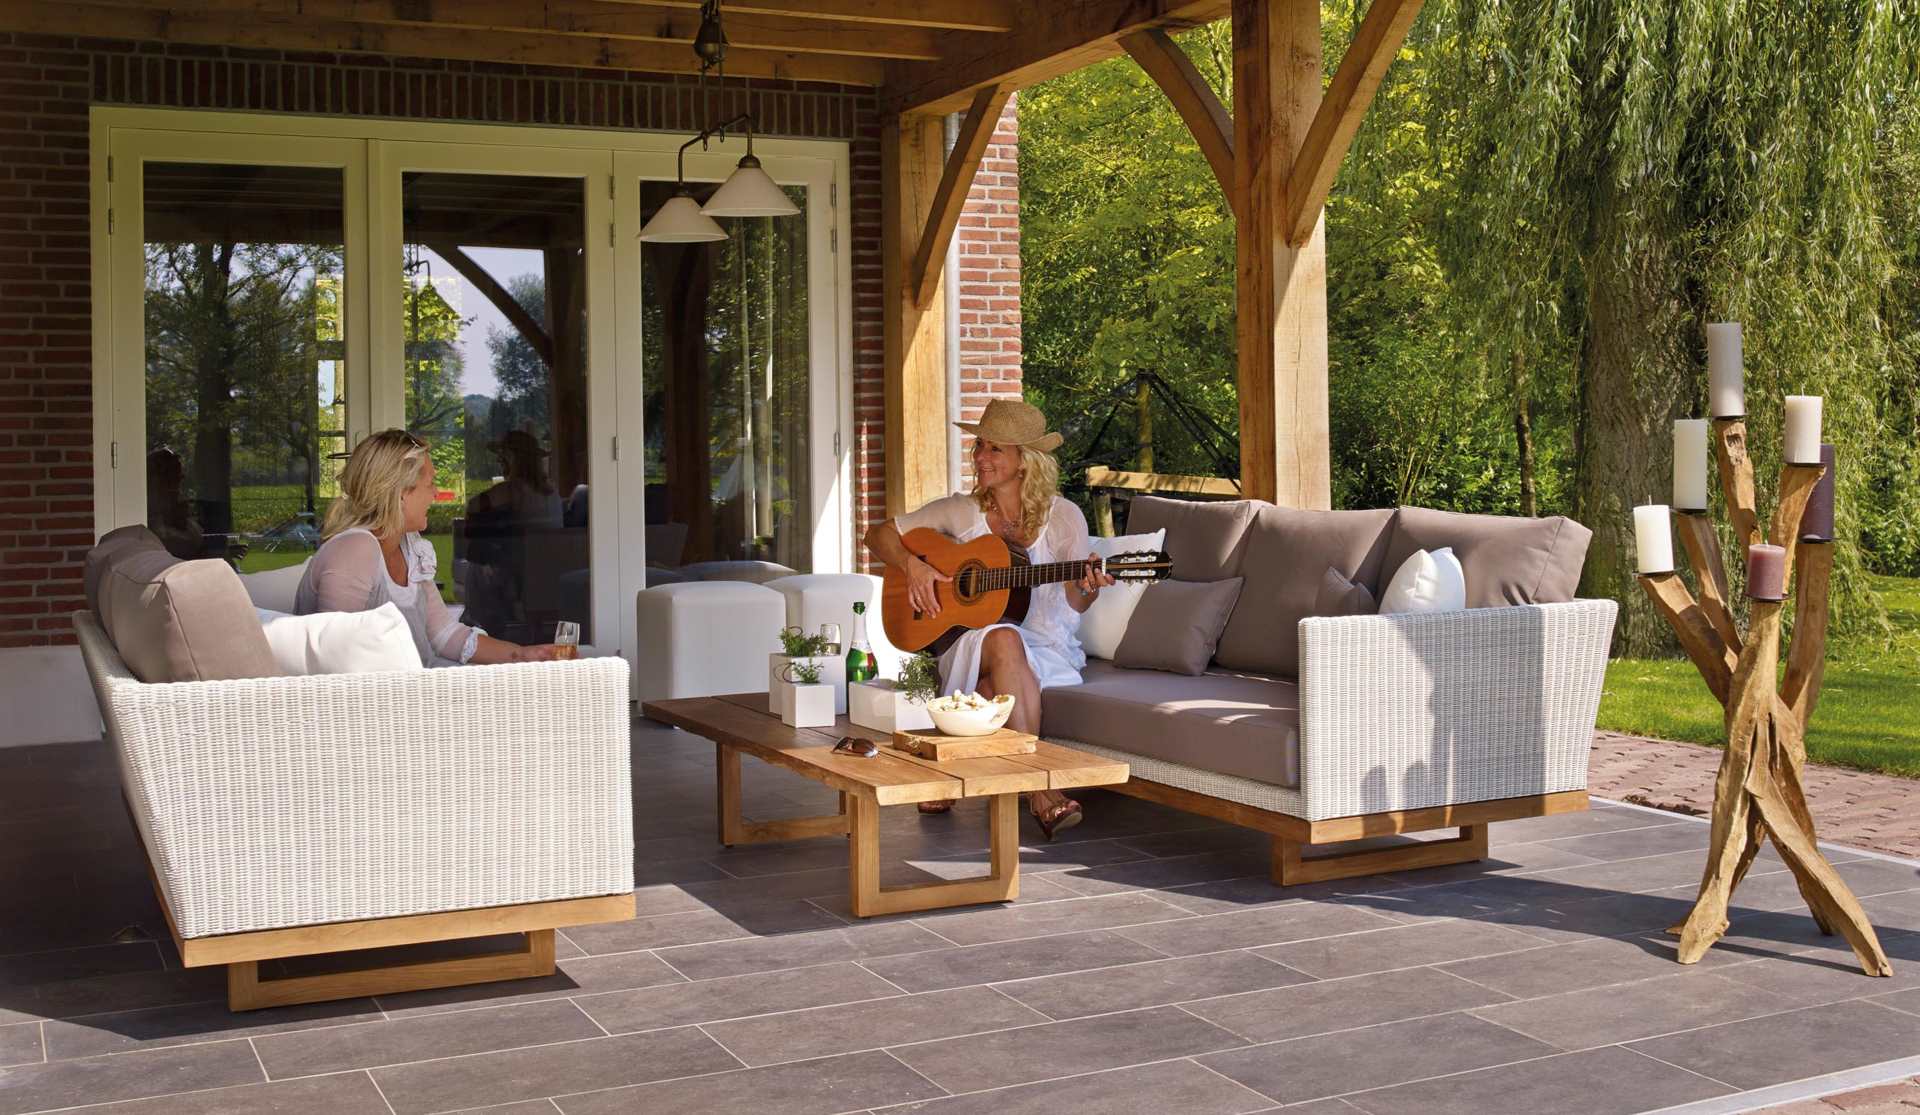 Outdoor living area | Featured image for the Patio Roofing Landing Page from MHI Roofing.